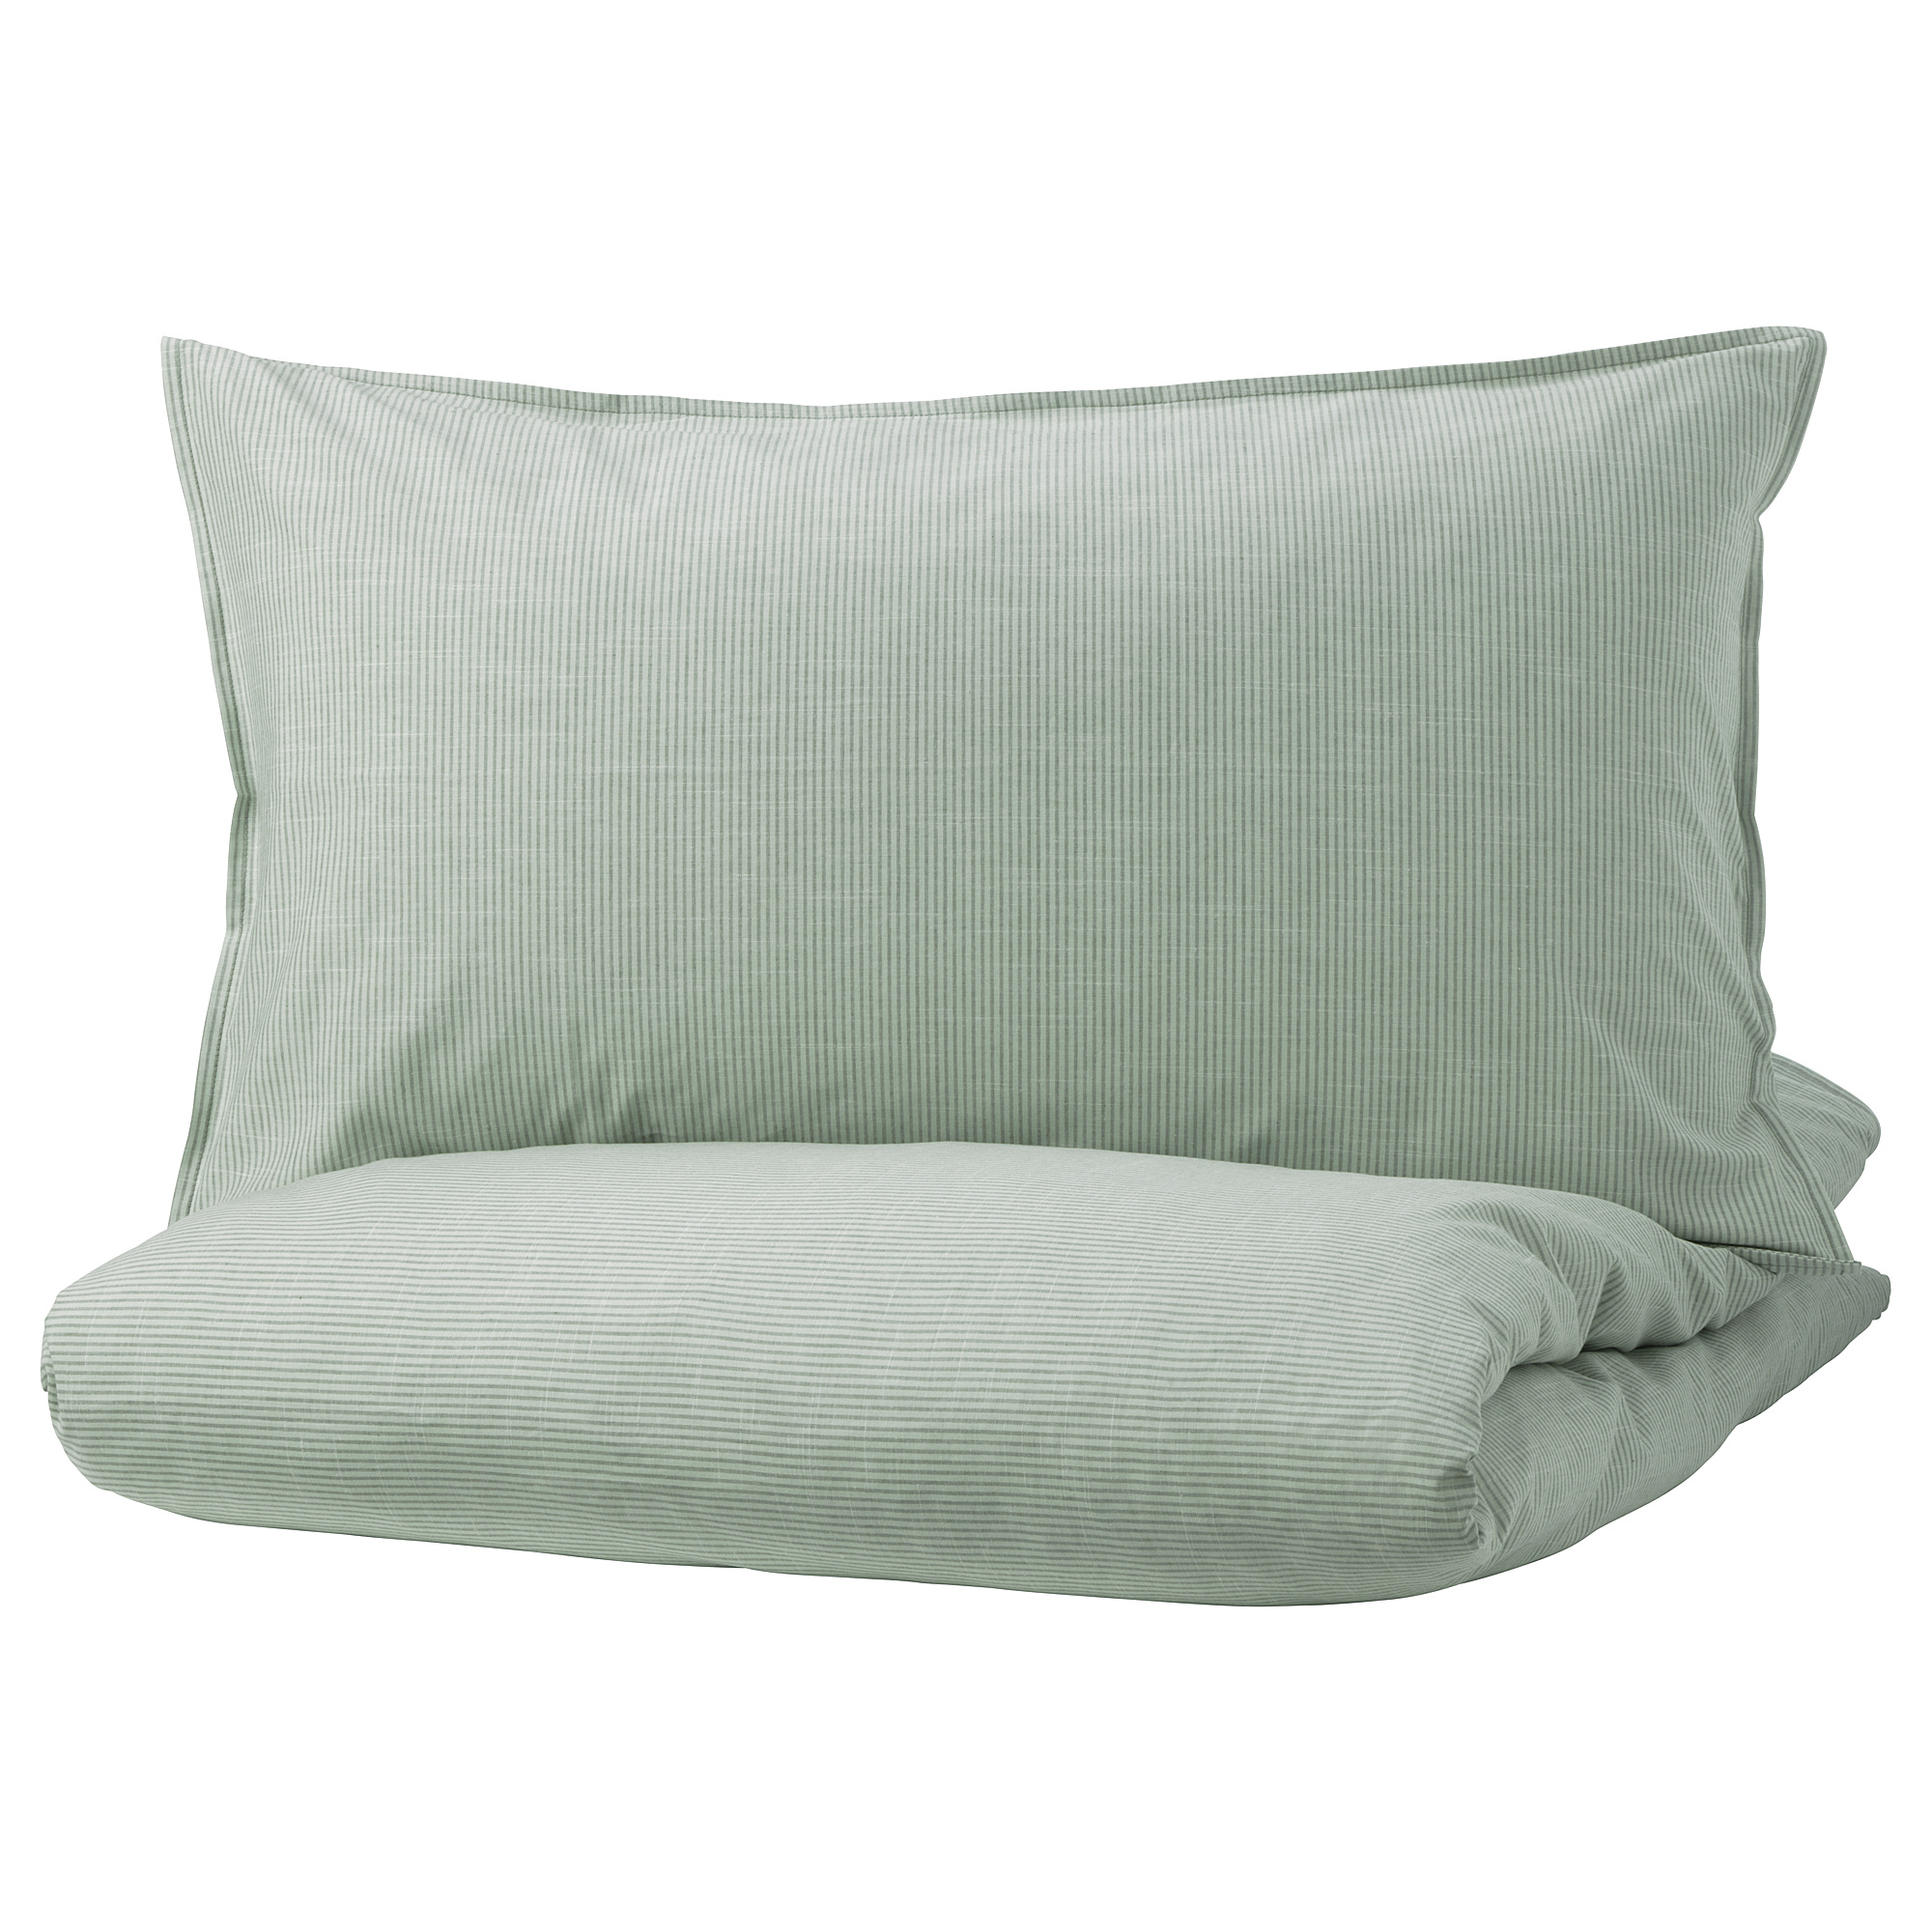 BERGPALM duvet cover and 2 pillowcases